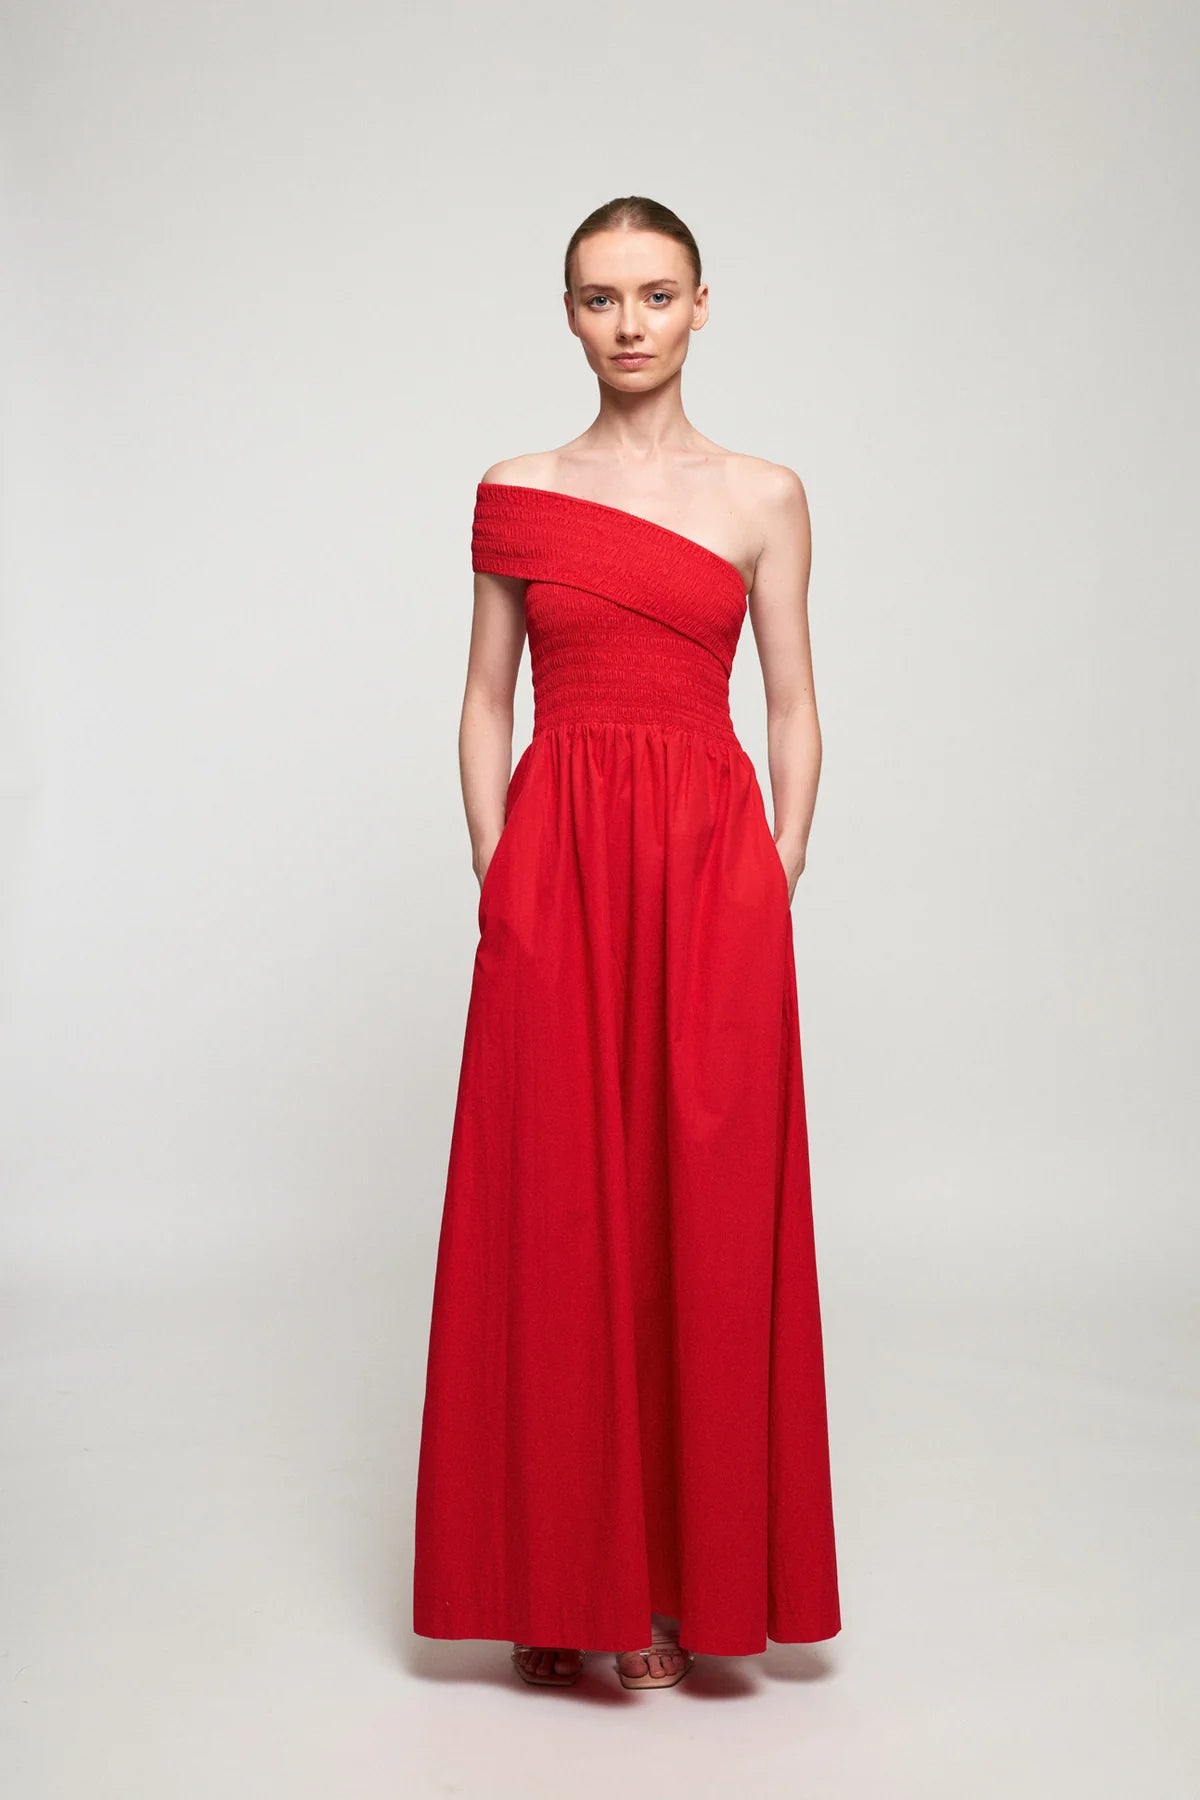 S/W/F One Shoulder Shirred Maxi Dress - Red